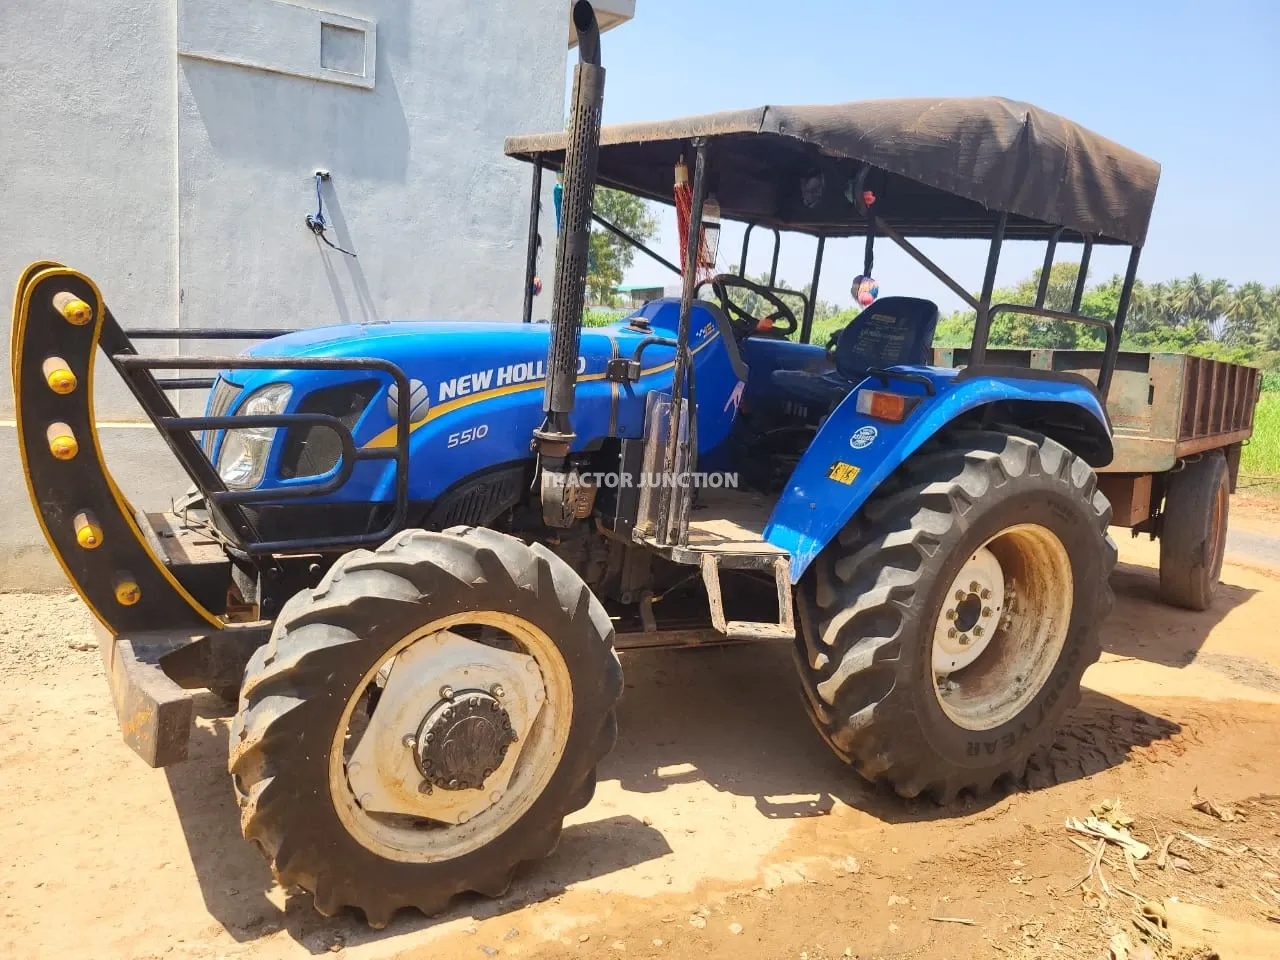 New Holland Excel Ultima 5510